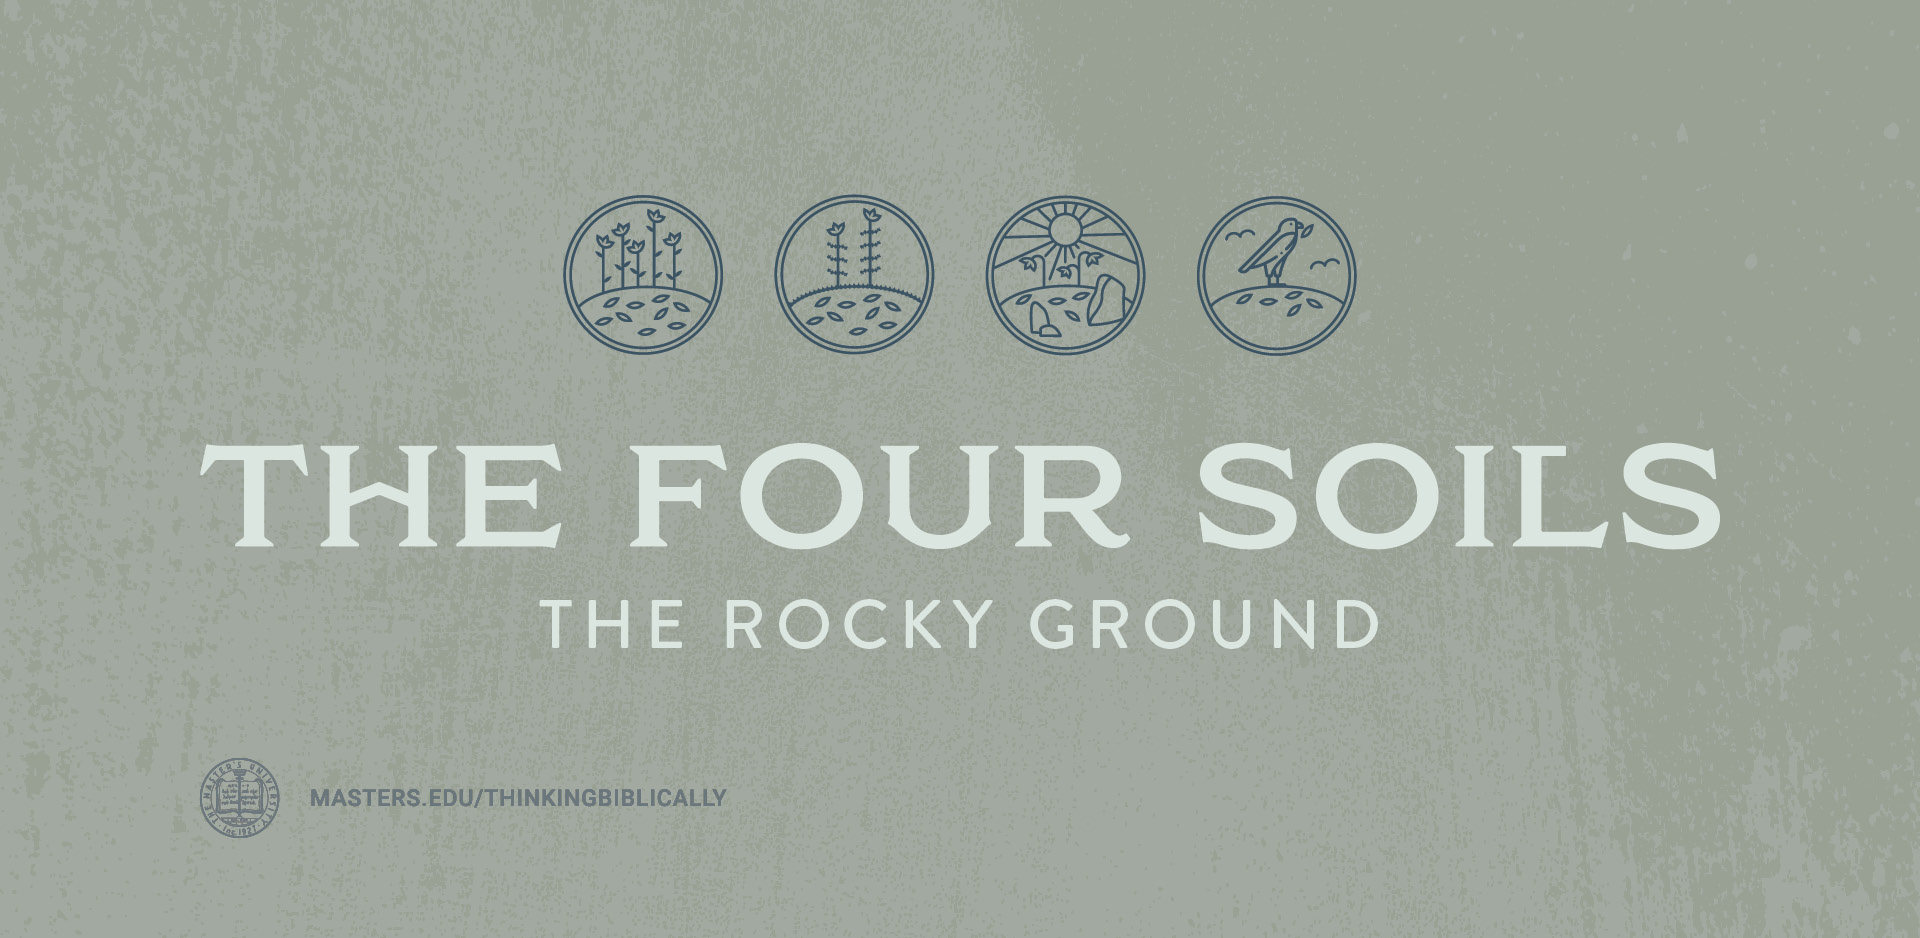 The Four Soils: The Rocky Ground Featured Image